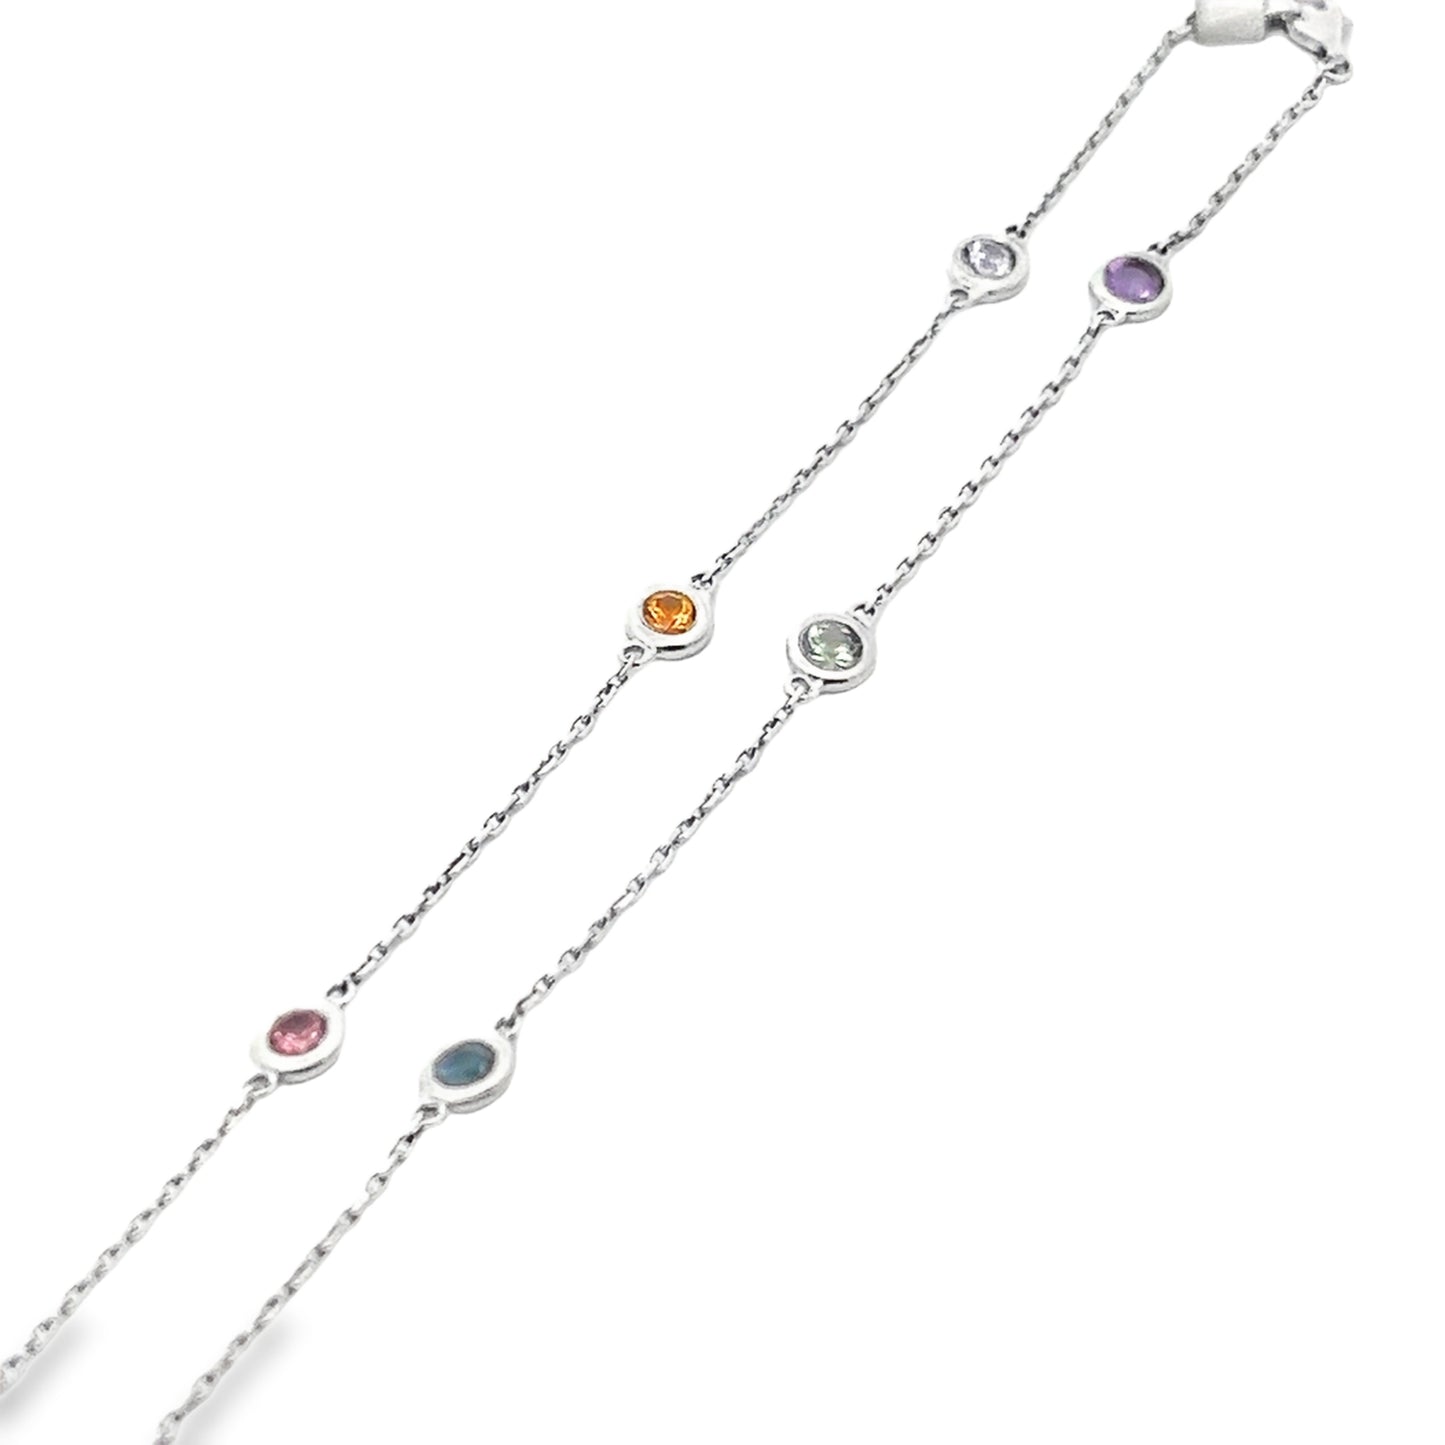 Birthstone Stationary Necklace in 14K White Gold